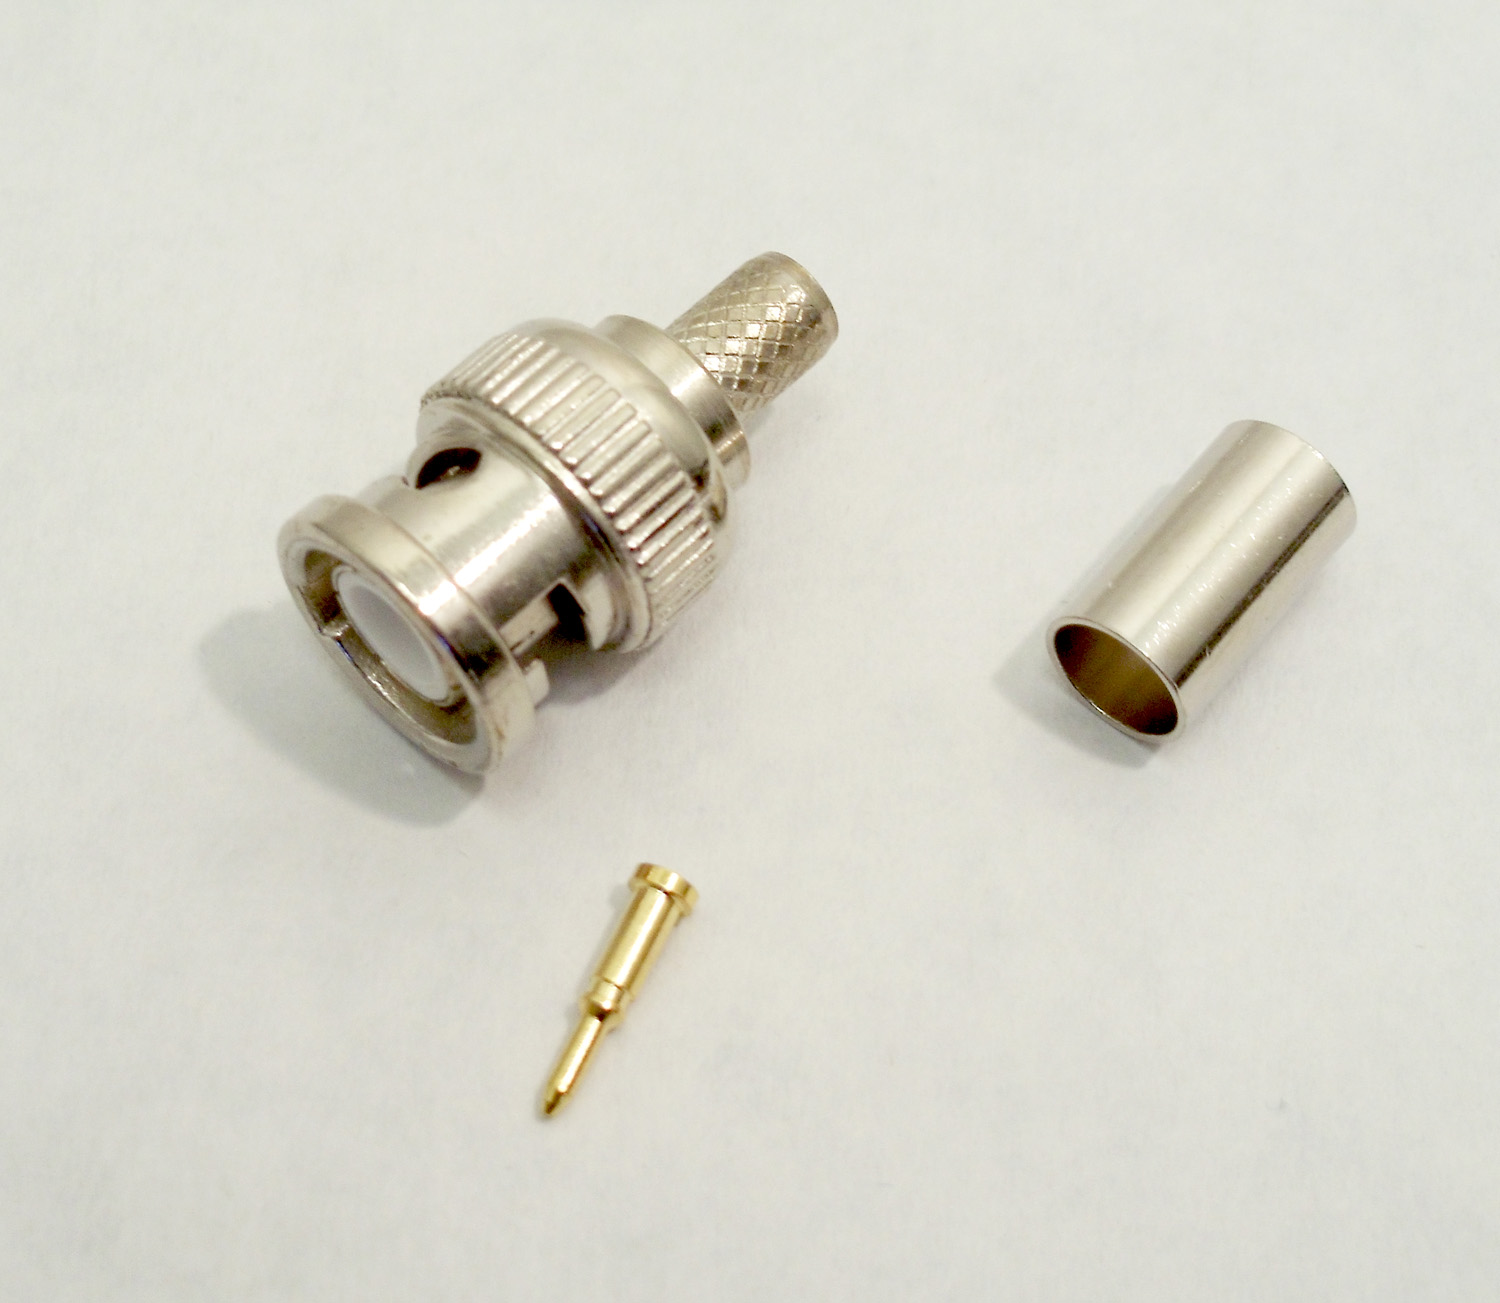 Procomm - Bnc10-8X Male Bnc Crimp On Connector For Rg8X Coax Cable